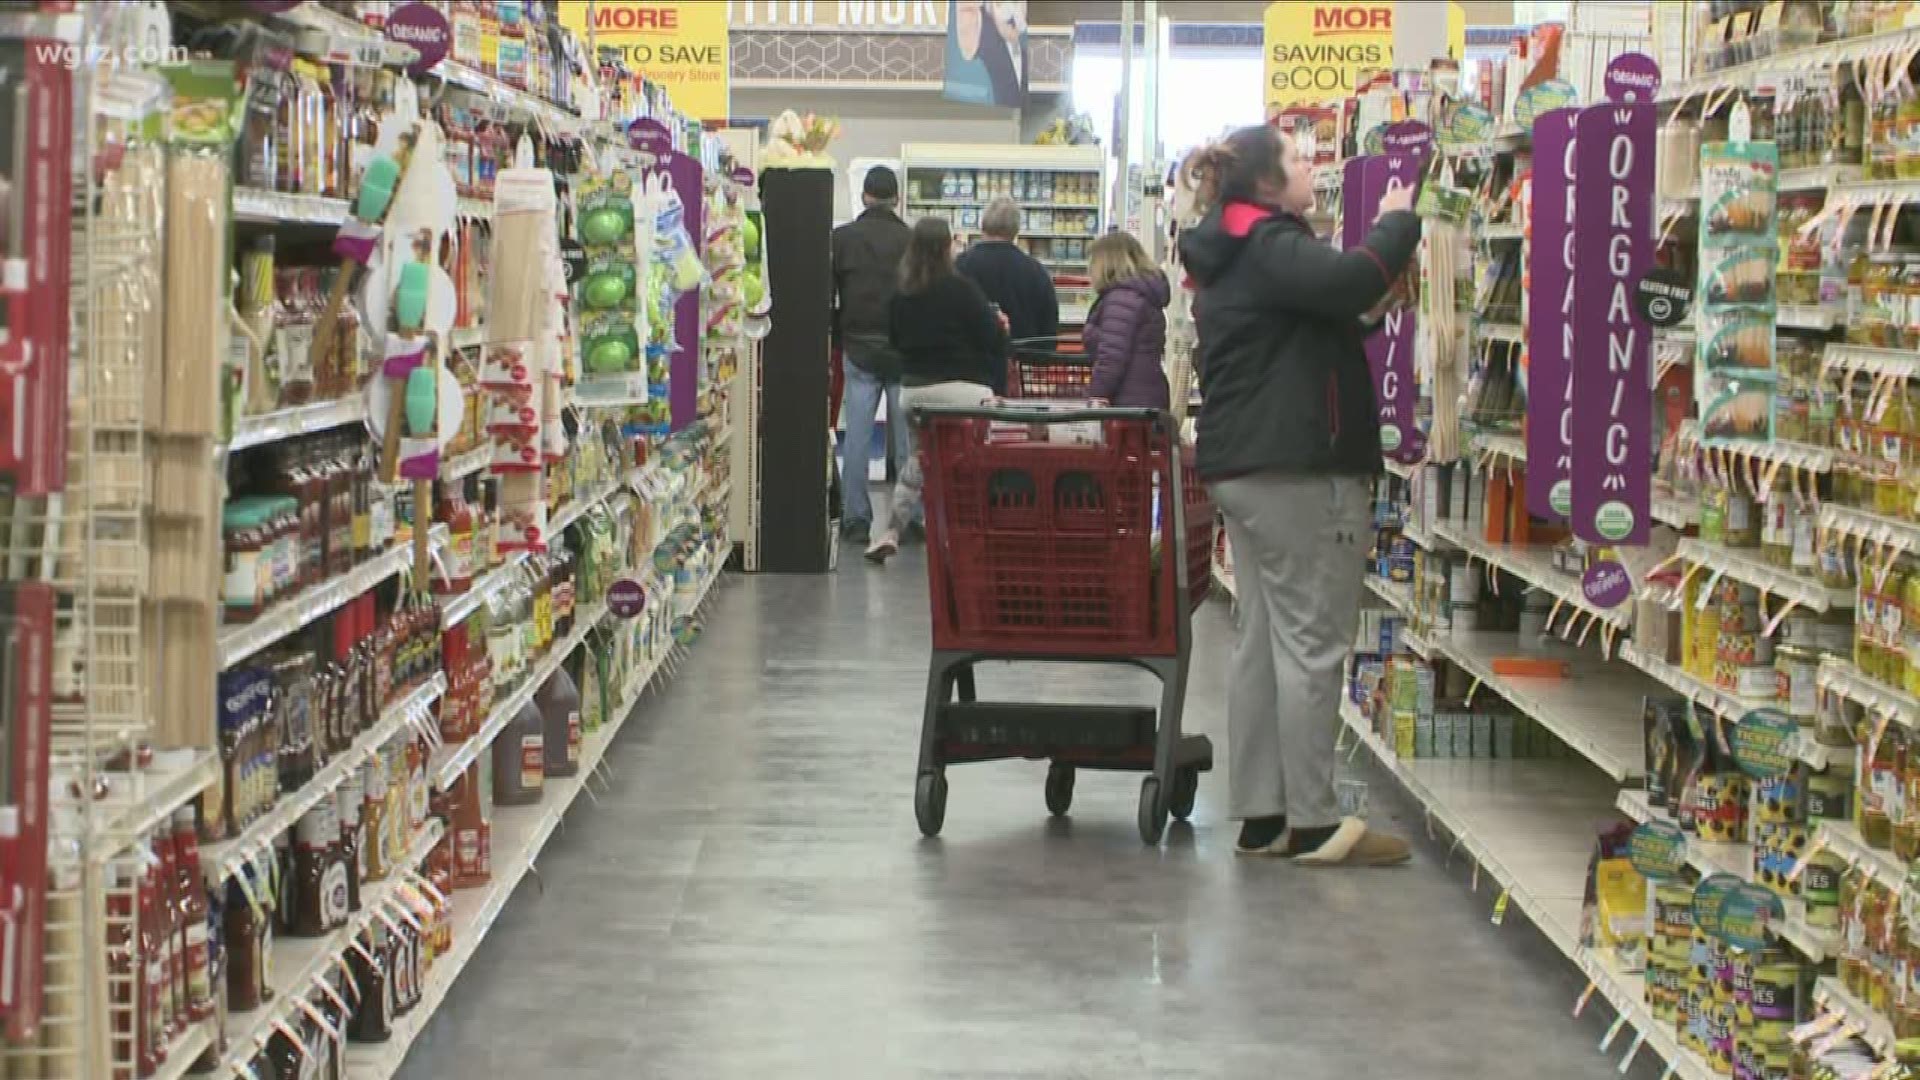 Local grocery stores, retail stores restocking shelves